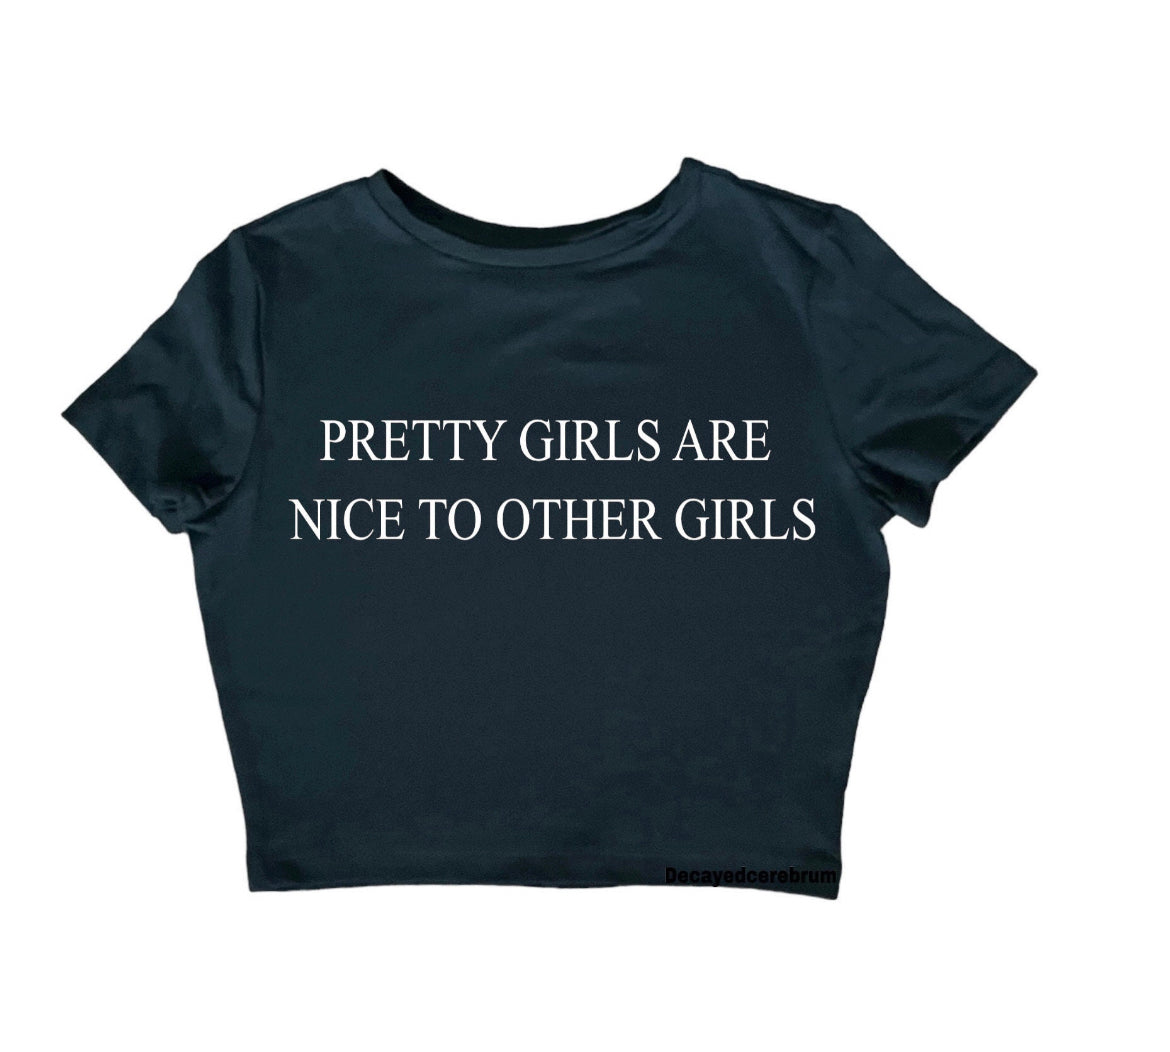 Pretty girls are nice to other girls baby cropped baby tee